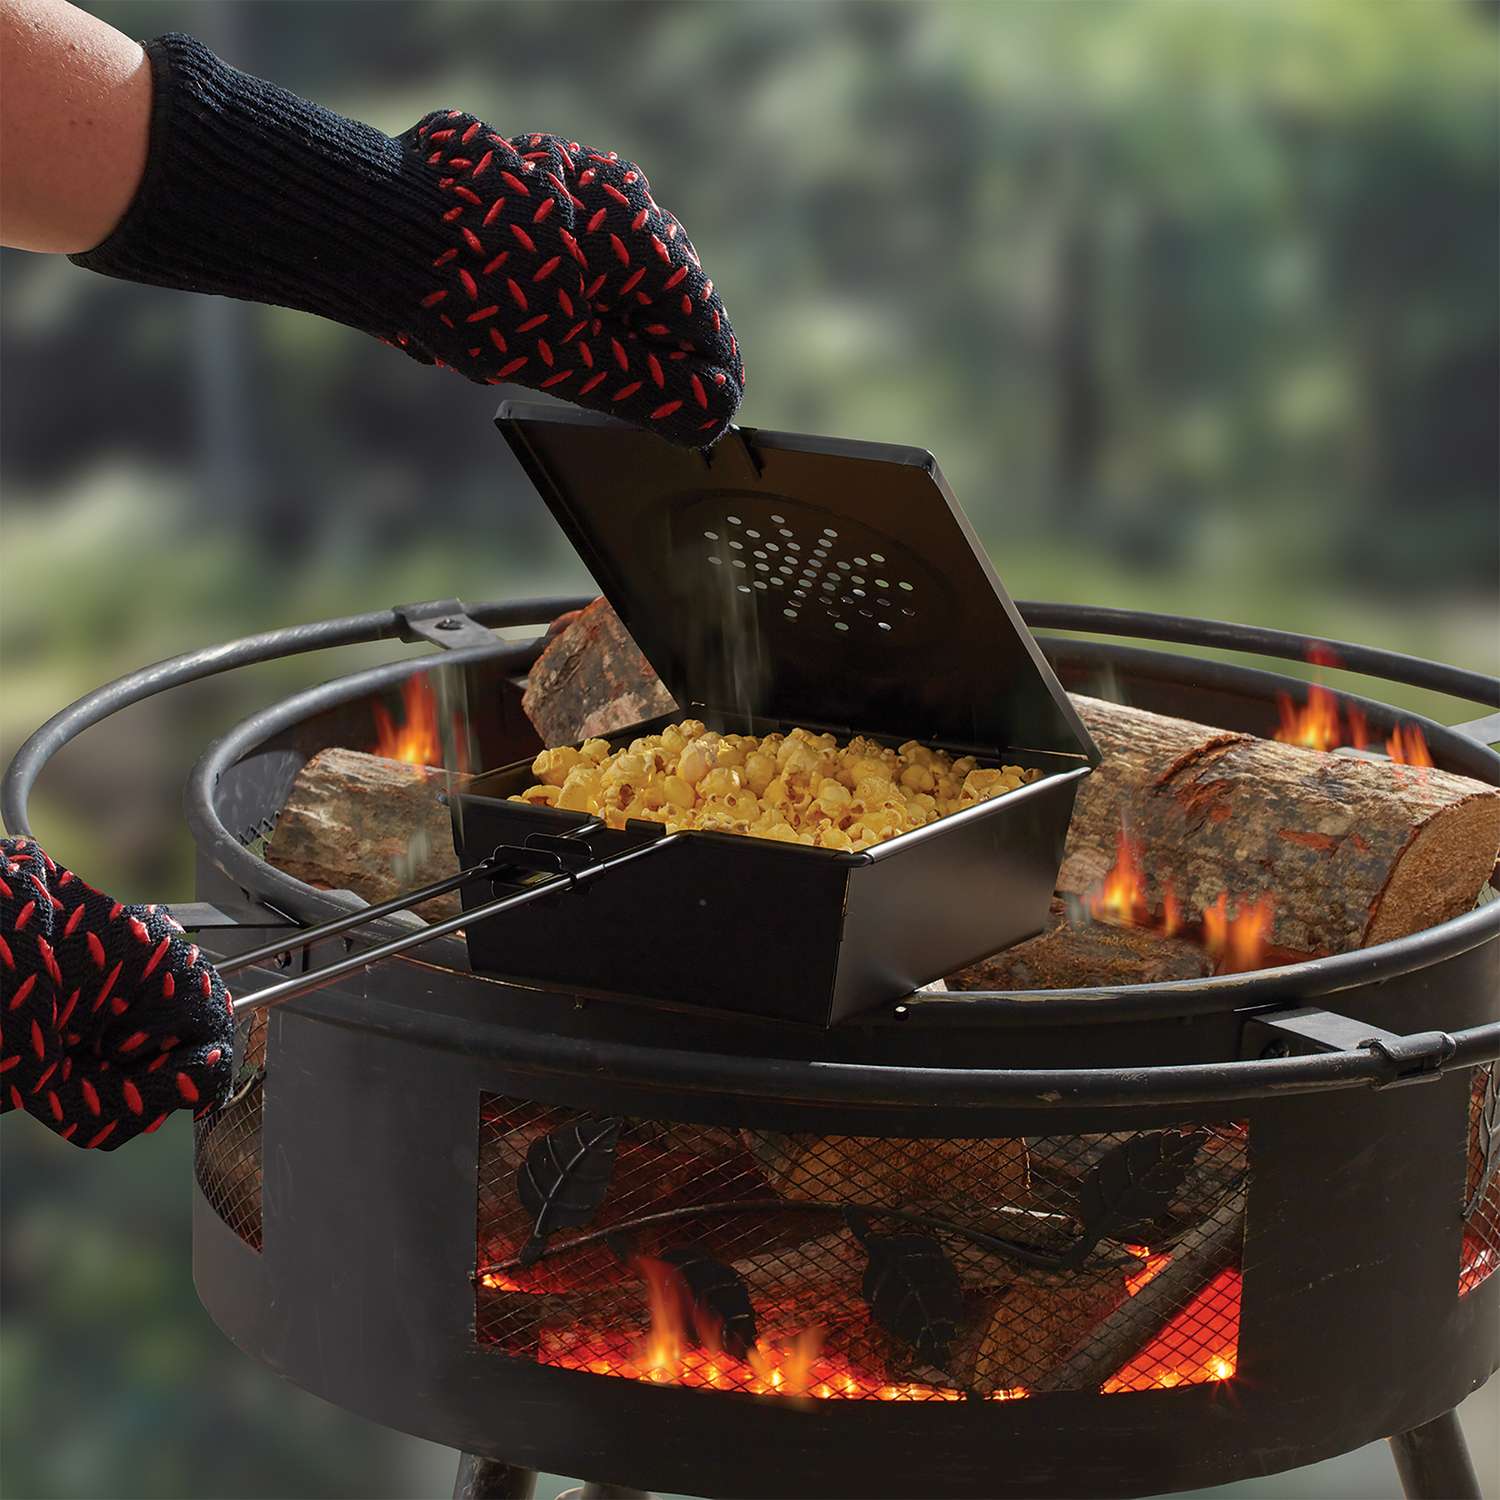 Outdoor Popcorn Popper, campfire cooking